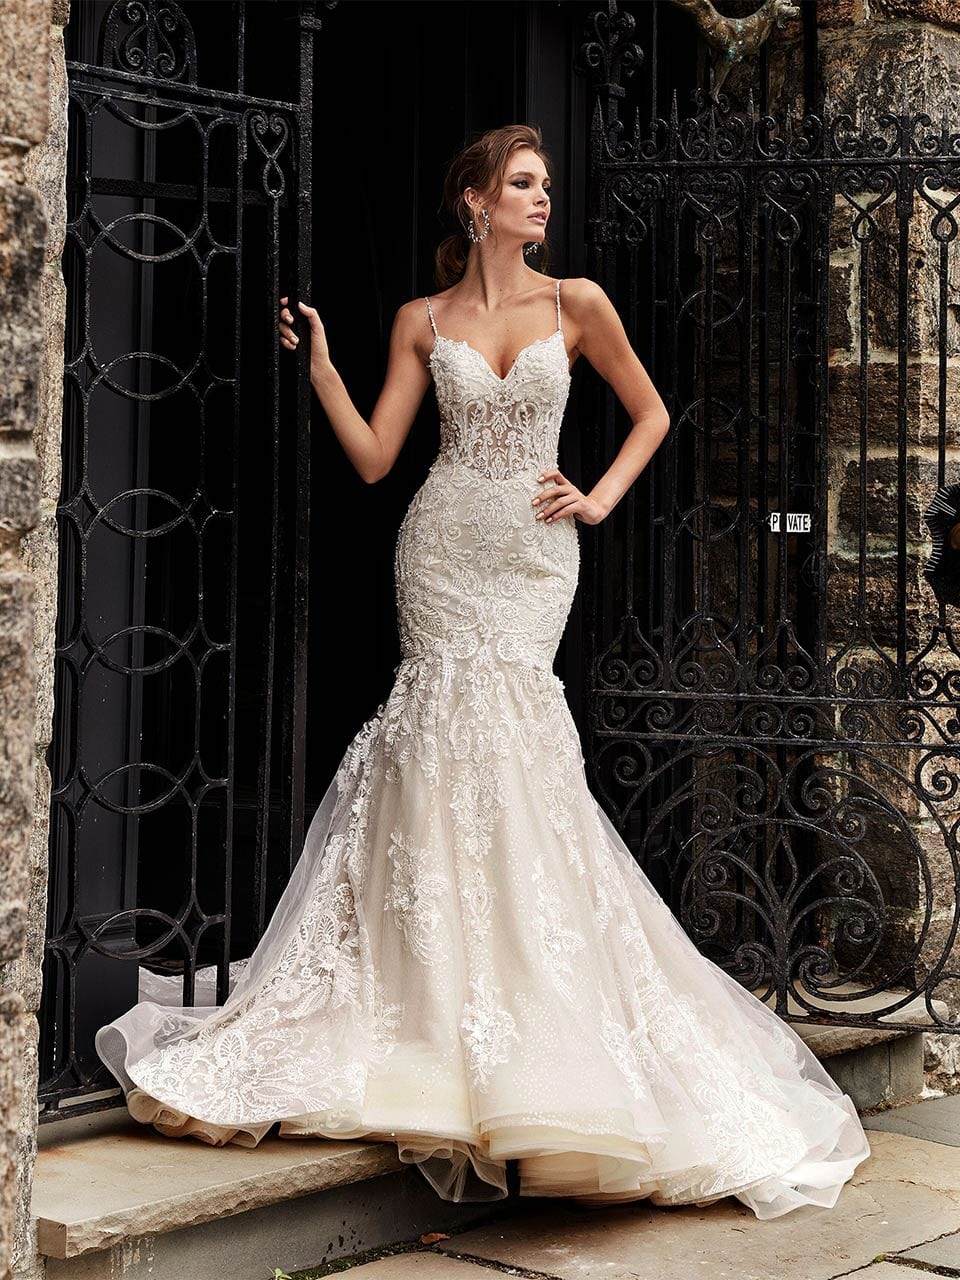 Pearls Place Bridal, Bridal Gowns, Pearl's Place Bridal